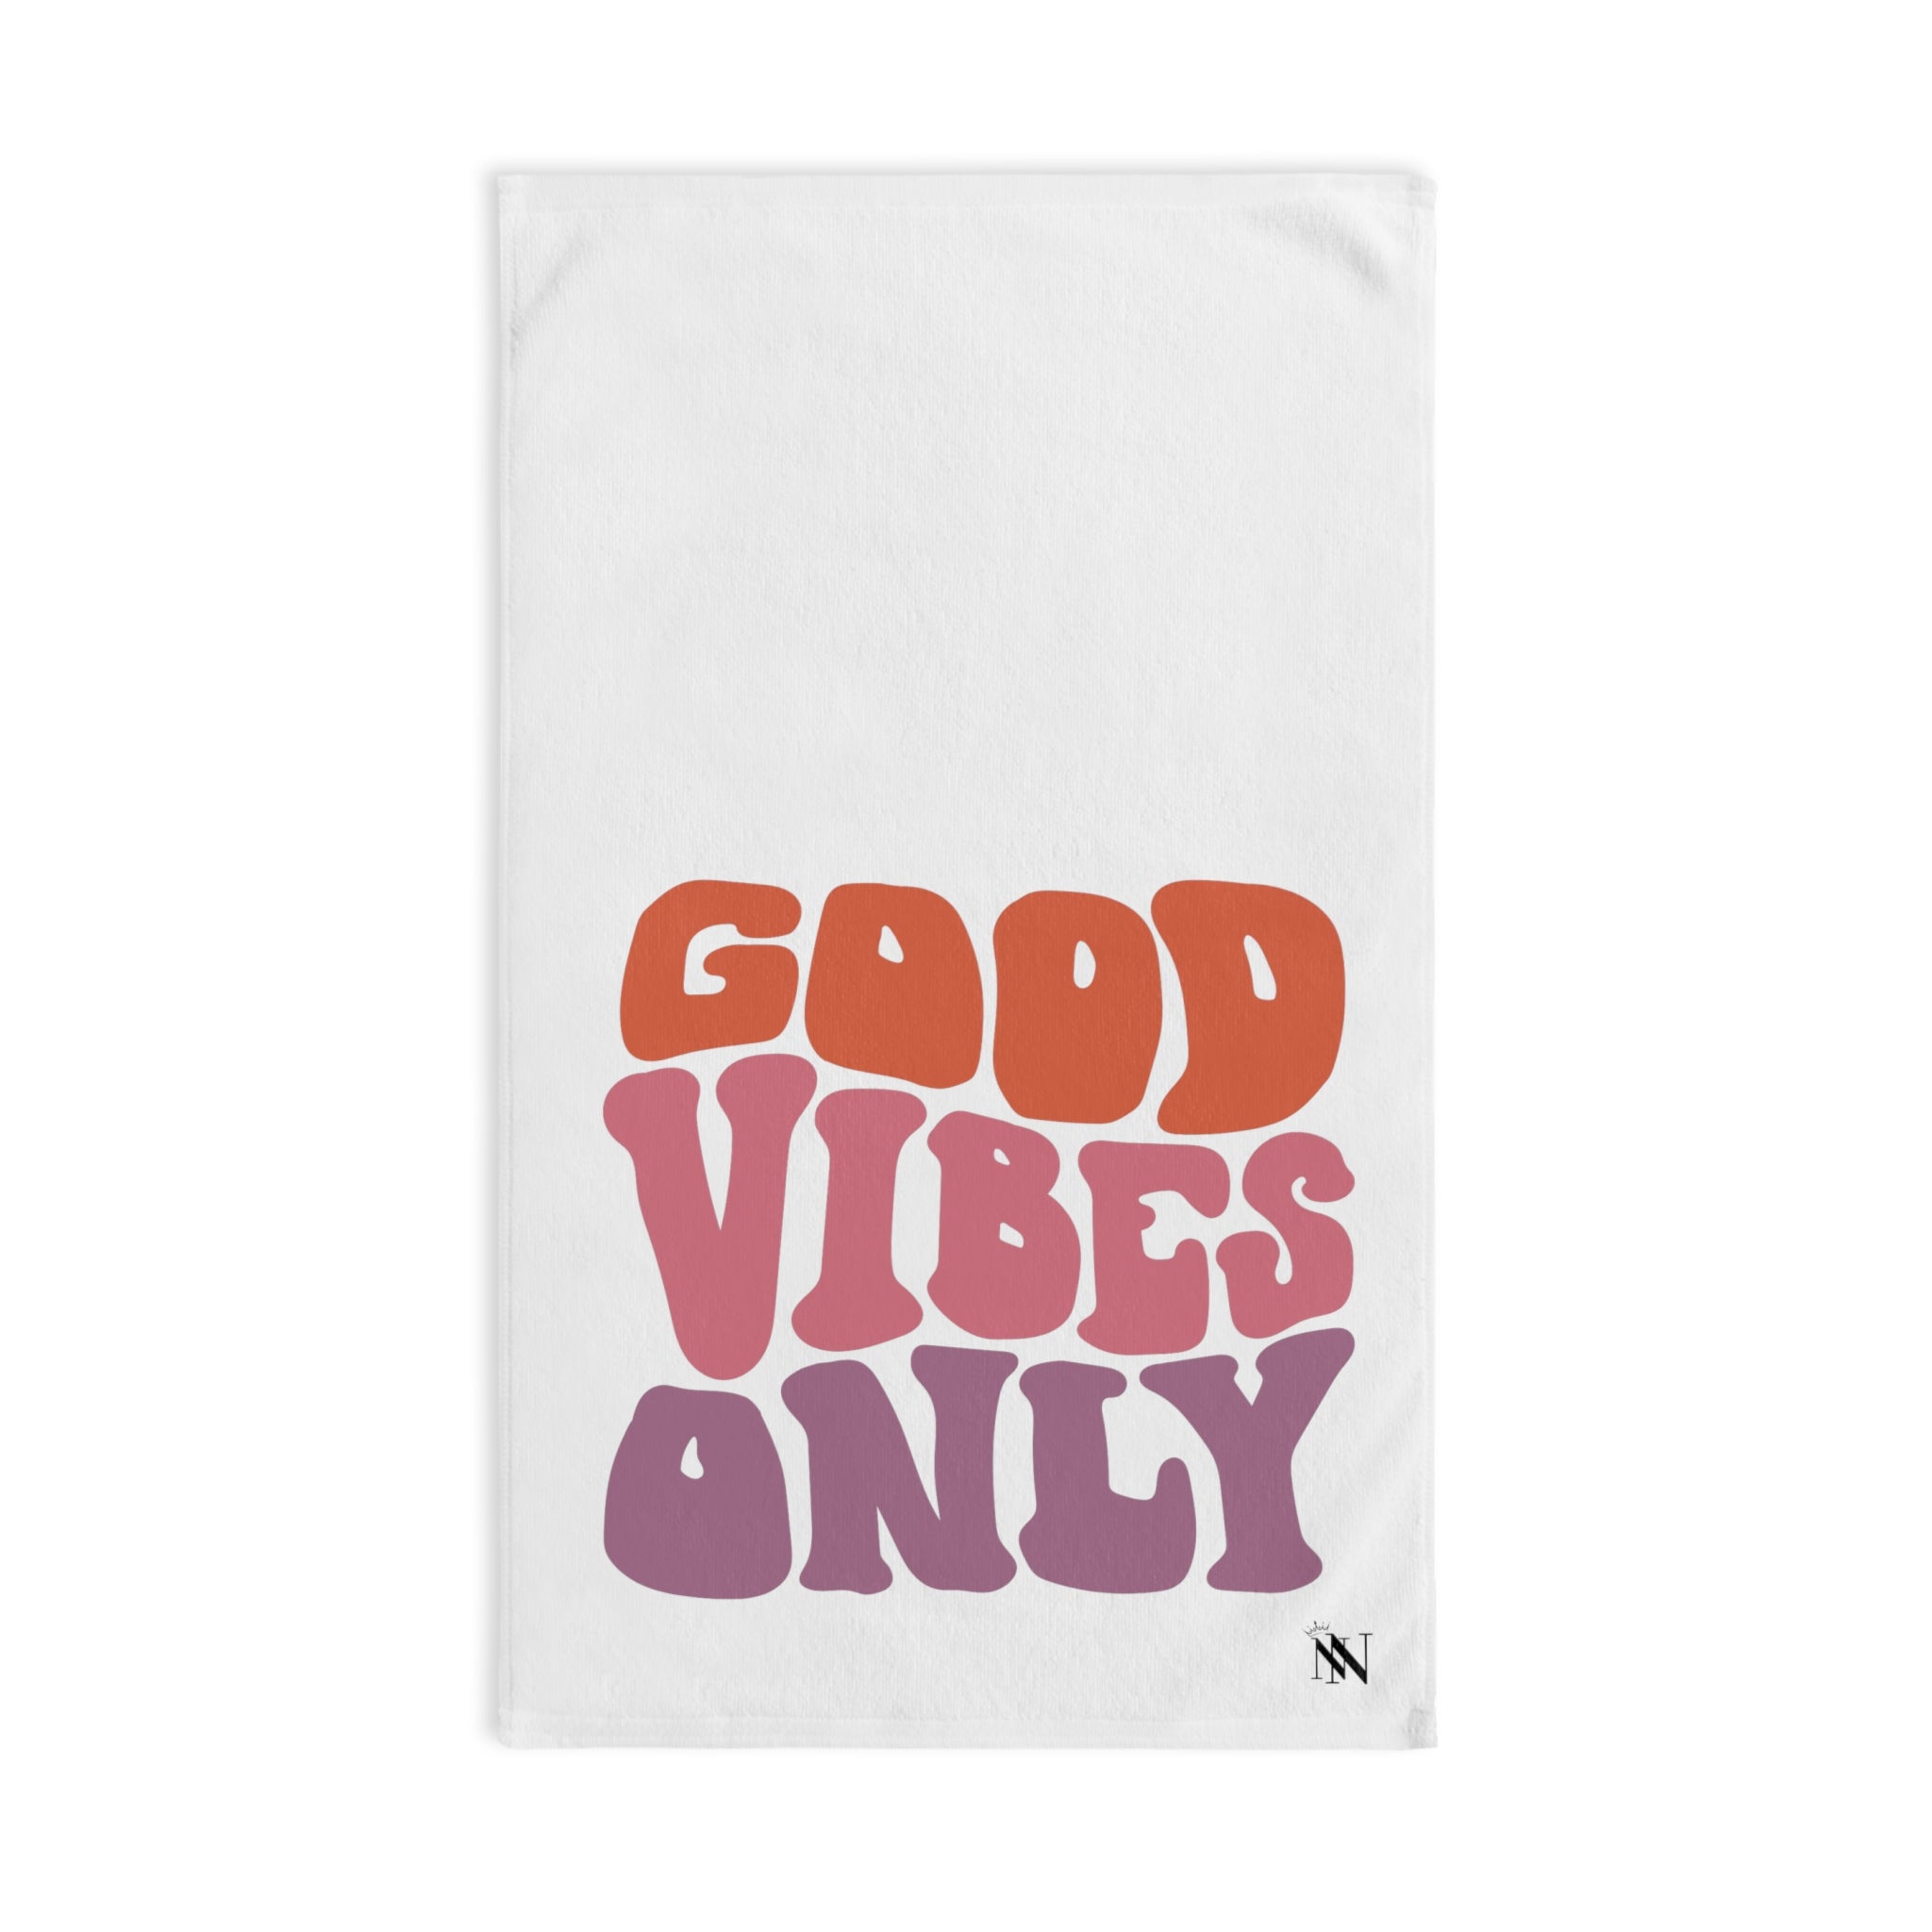 Only Vibes GoodWhite | Funny Gifts for Men - Gifts for Him - Birthday Gifts for Men, Him, Her, Husband, Boyfriend, Girlfriend, New Couple Gifts, Fathers & Valentines Day Gifts, Christmas Gifts NECTAR NAPKINS